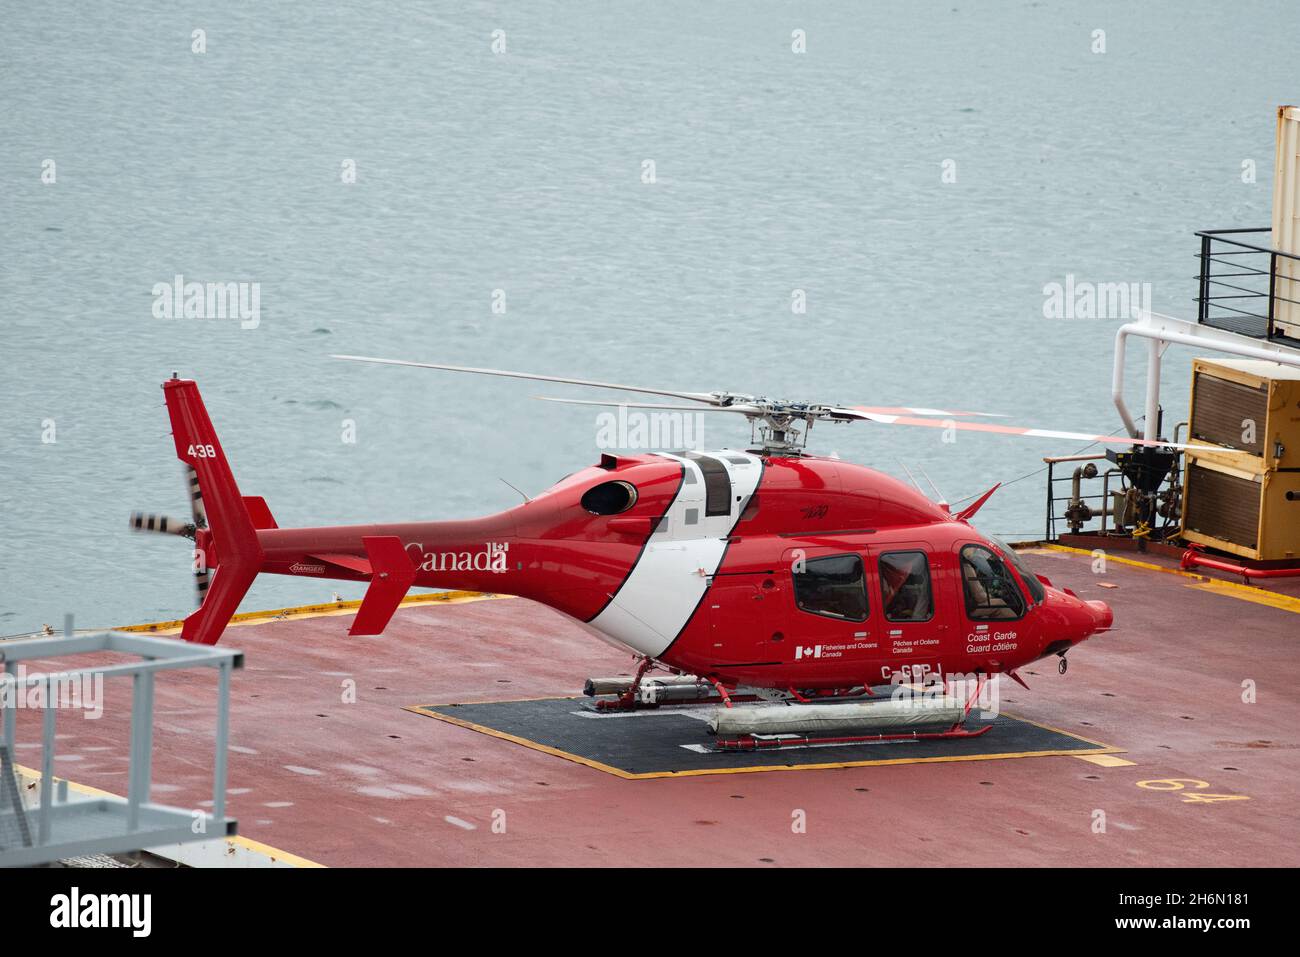 A Canadian Coast Guard cormorant helicopter or chopper on the helipad of a large Coast Guard ship. The emergency response air transport has it gear do Stock Photo